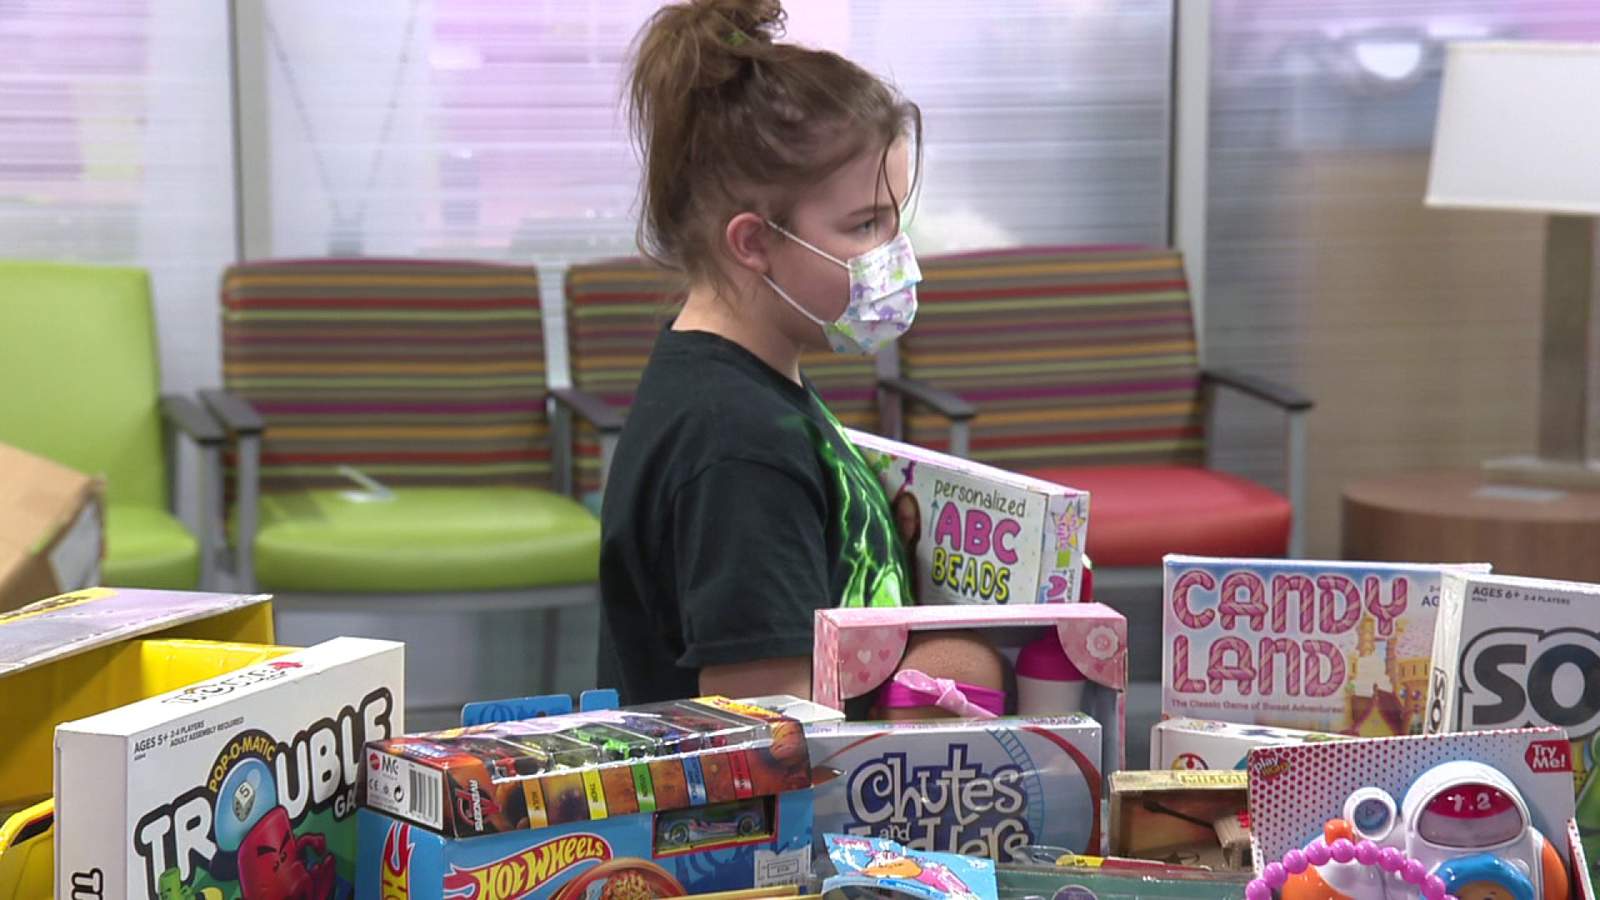 Cystic fibrosis patients get early holiday surprise at University Hospital